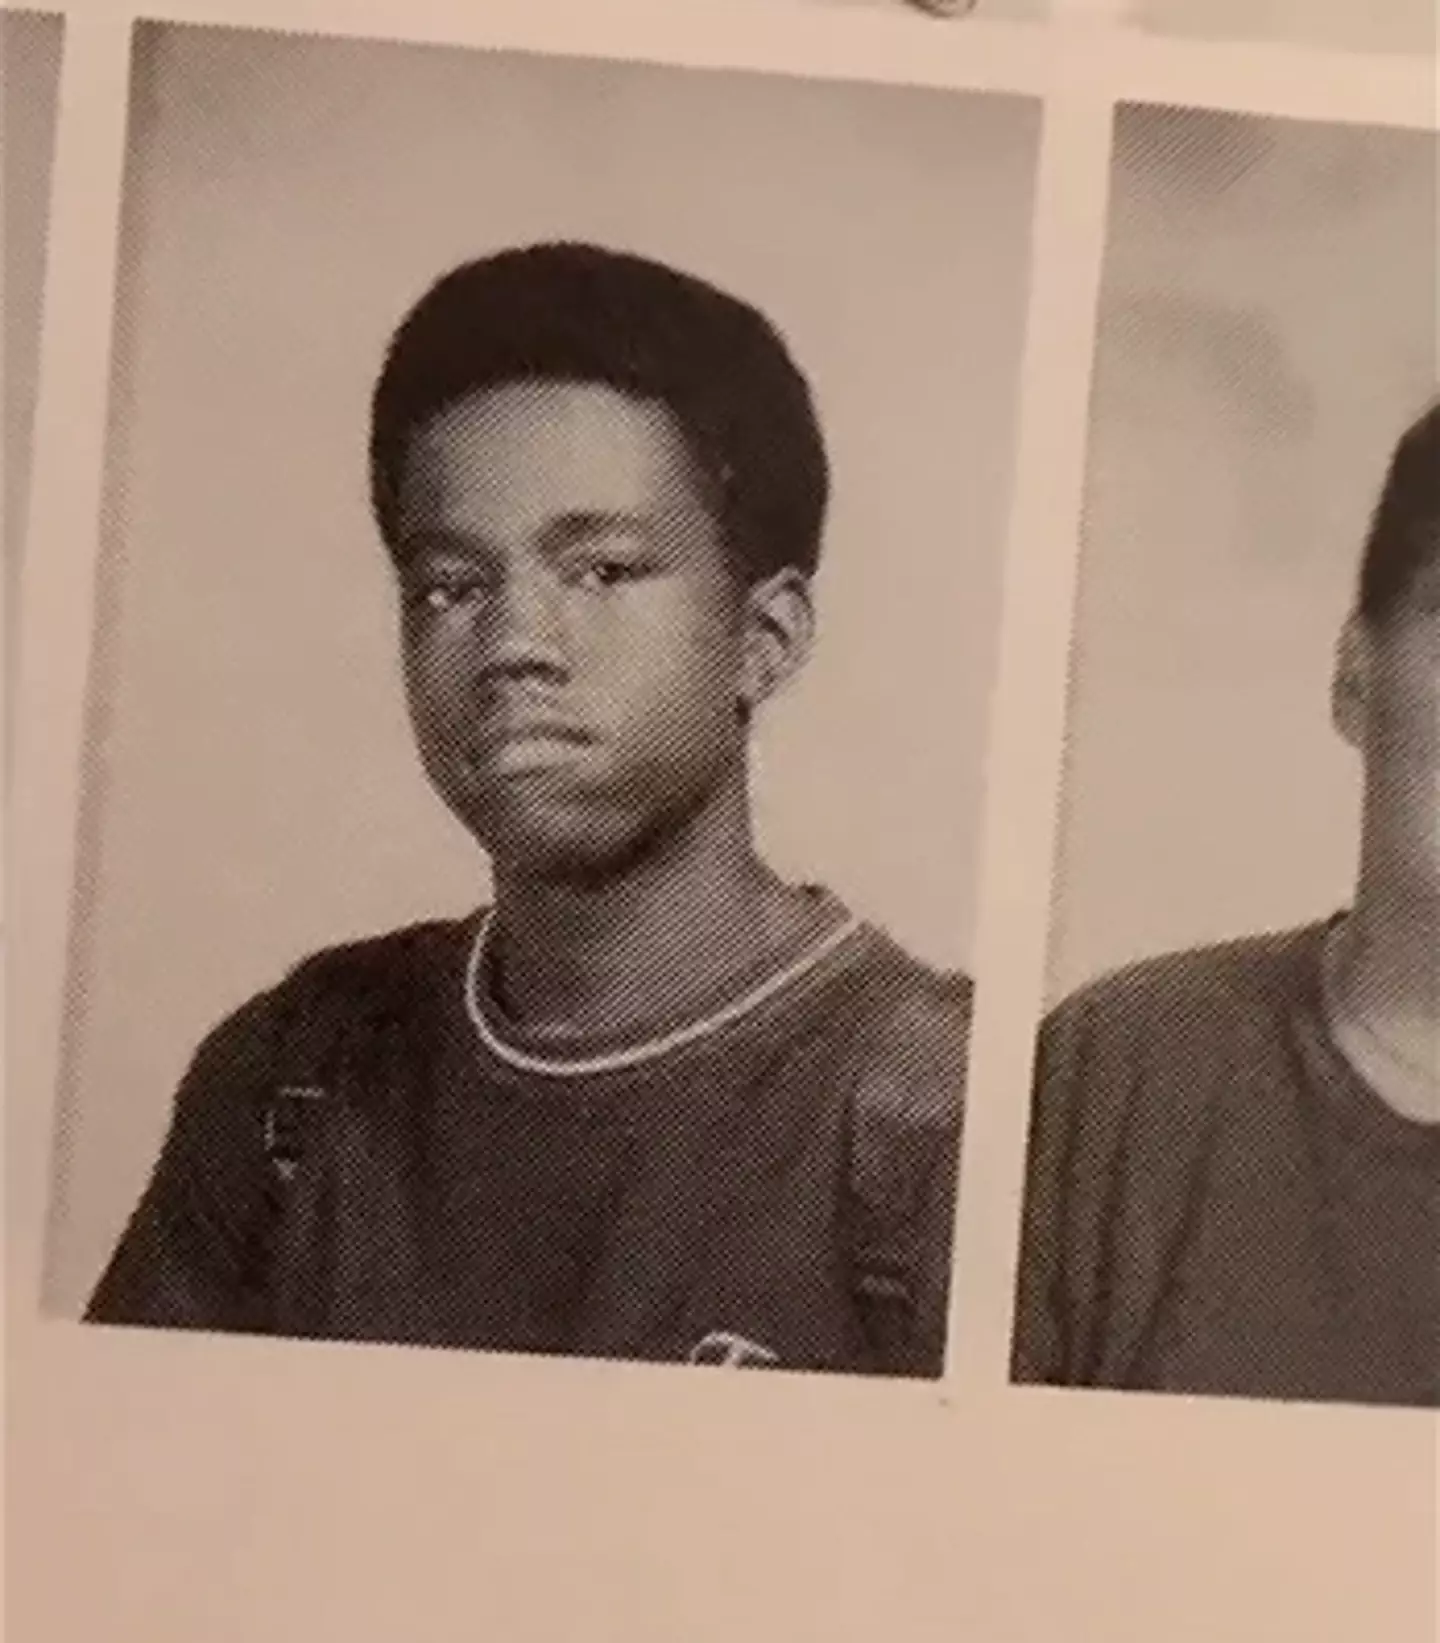 A young Kanye in his high school yearbook.